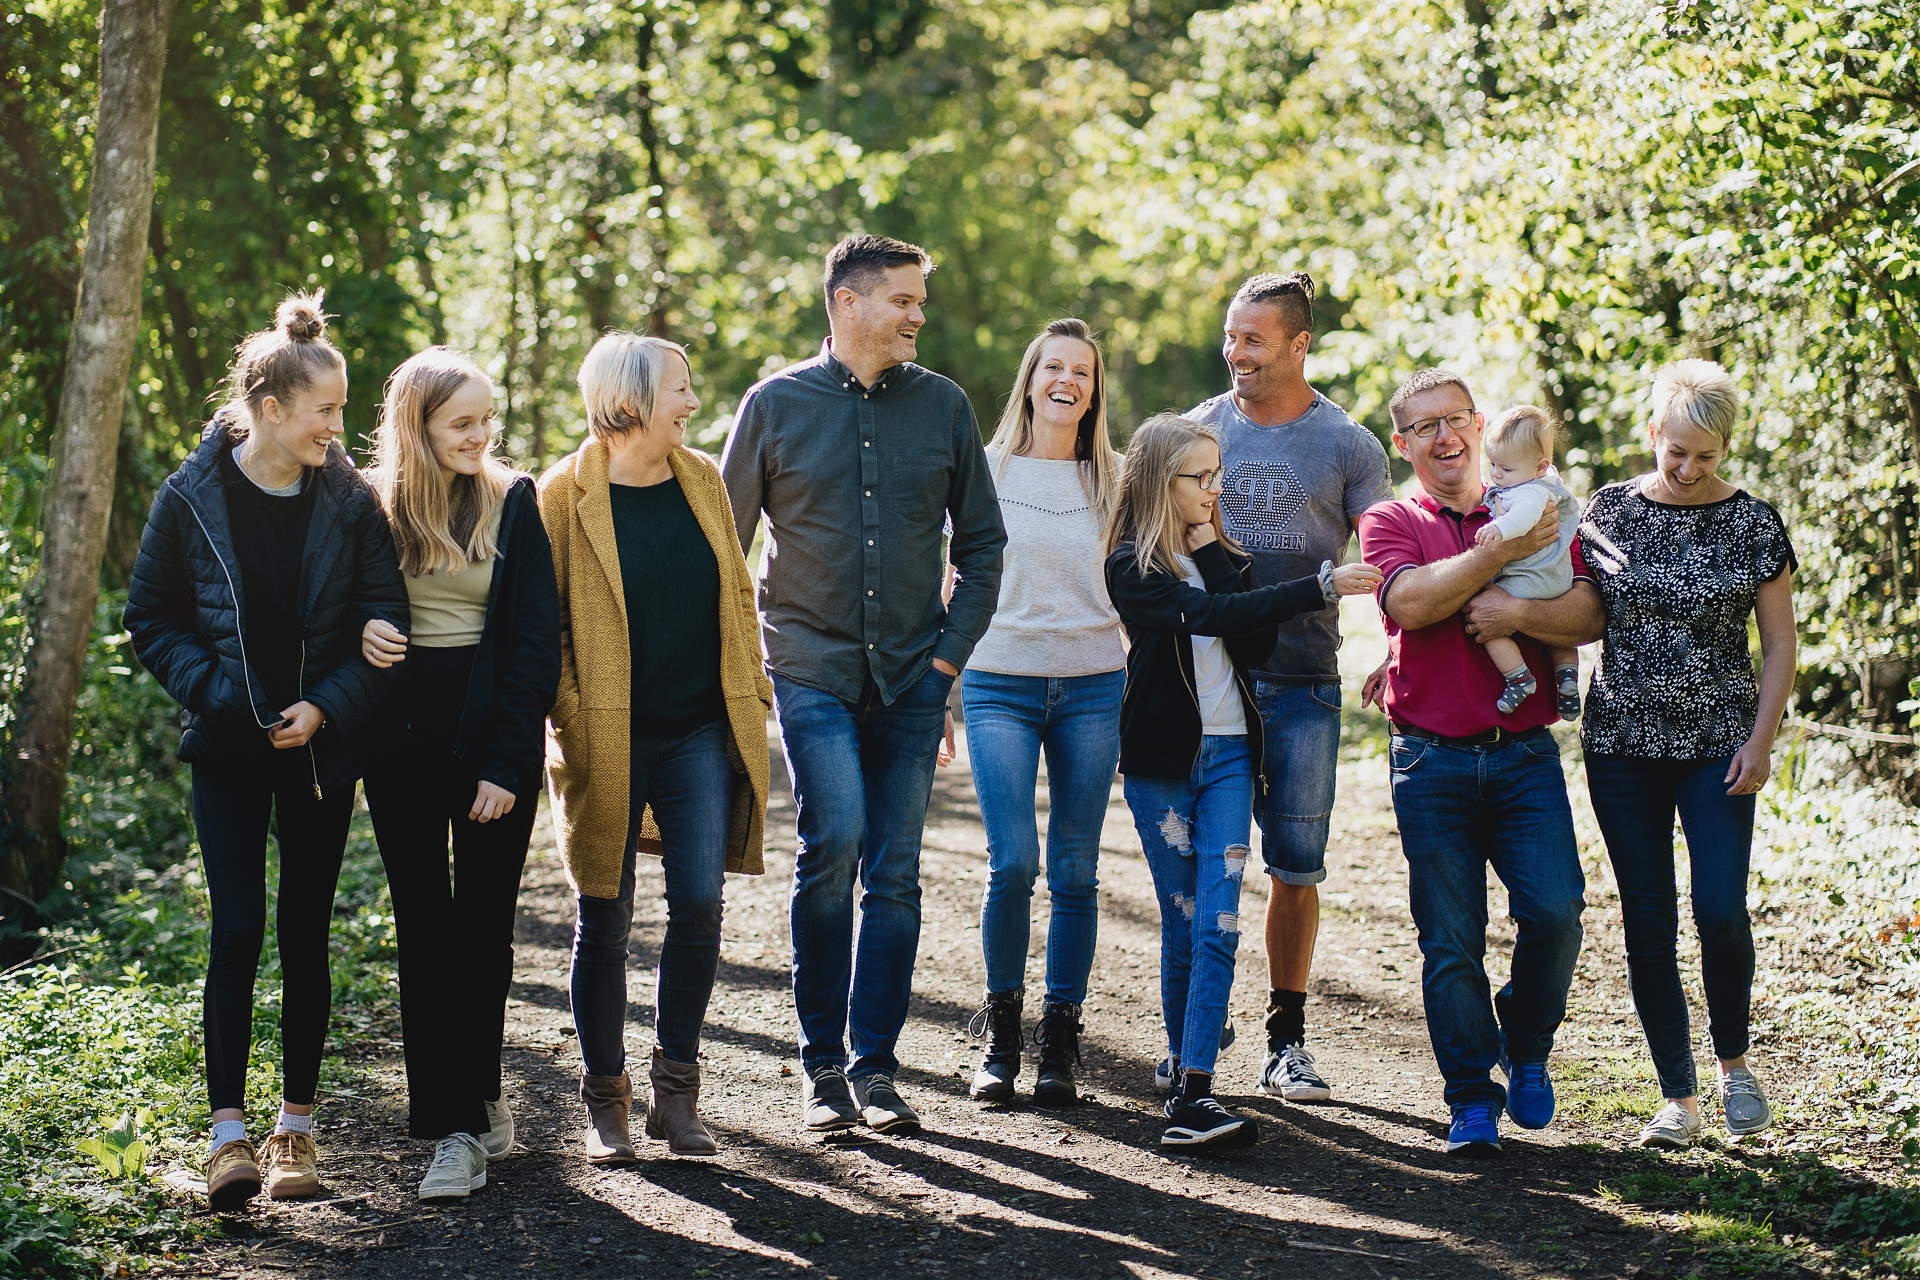 An extended family group photograph, walking and laughing together